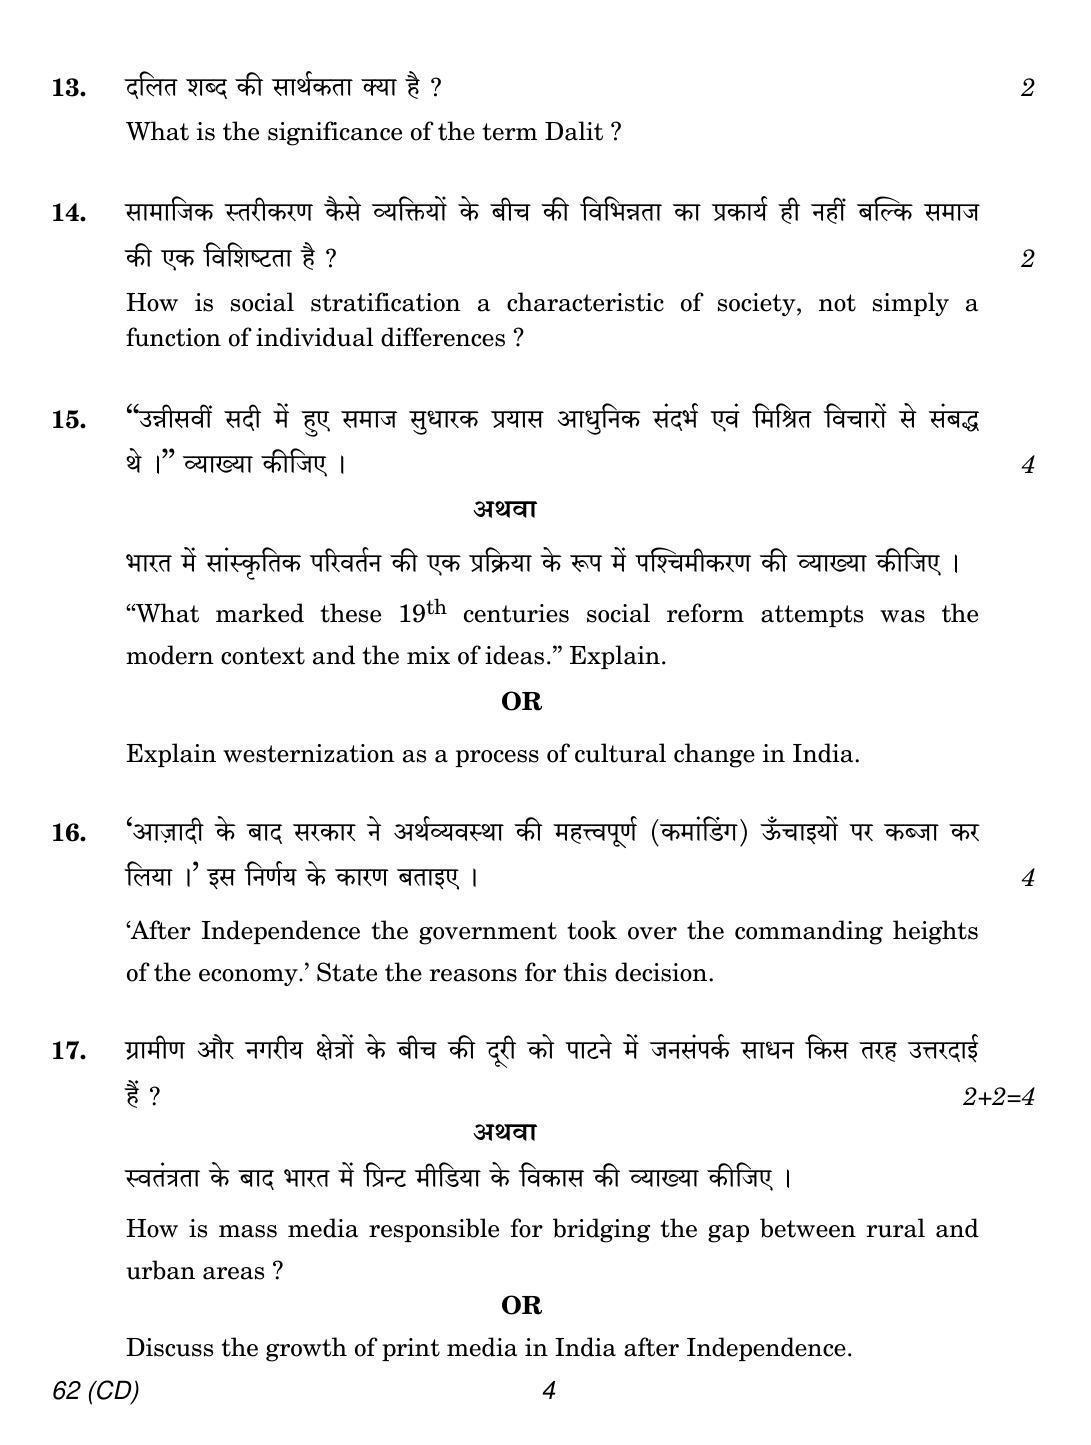 CBSE Class 12 62 SOCIOLOGY CD 2018 Question Paper - Page 4